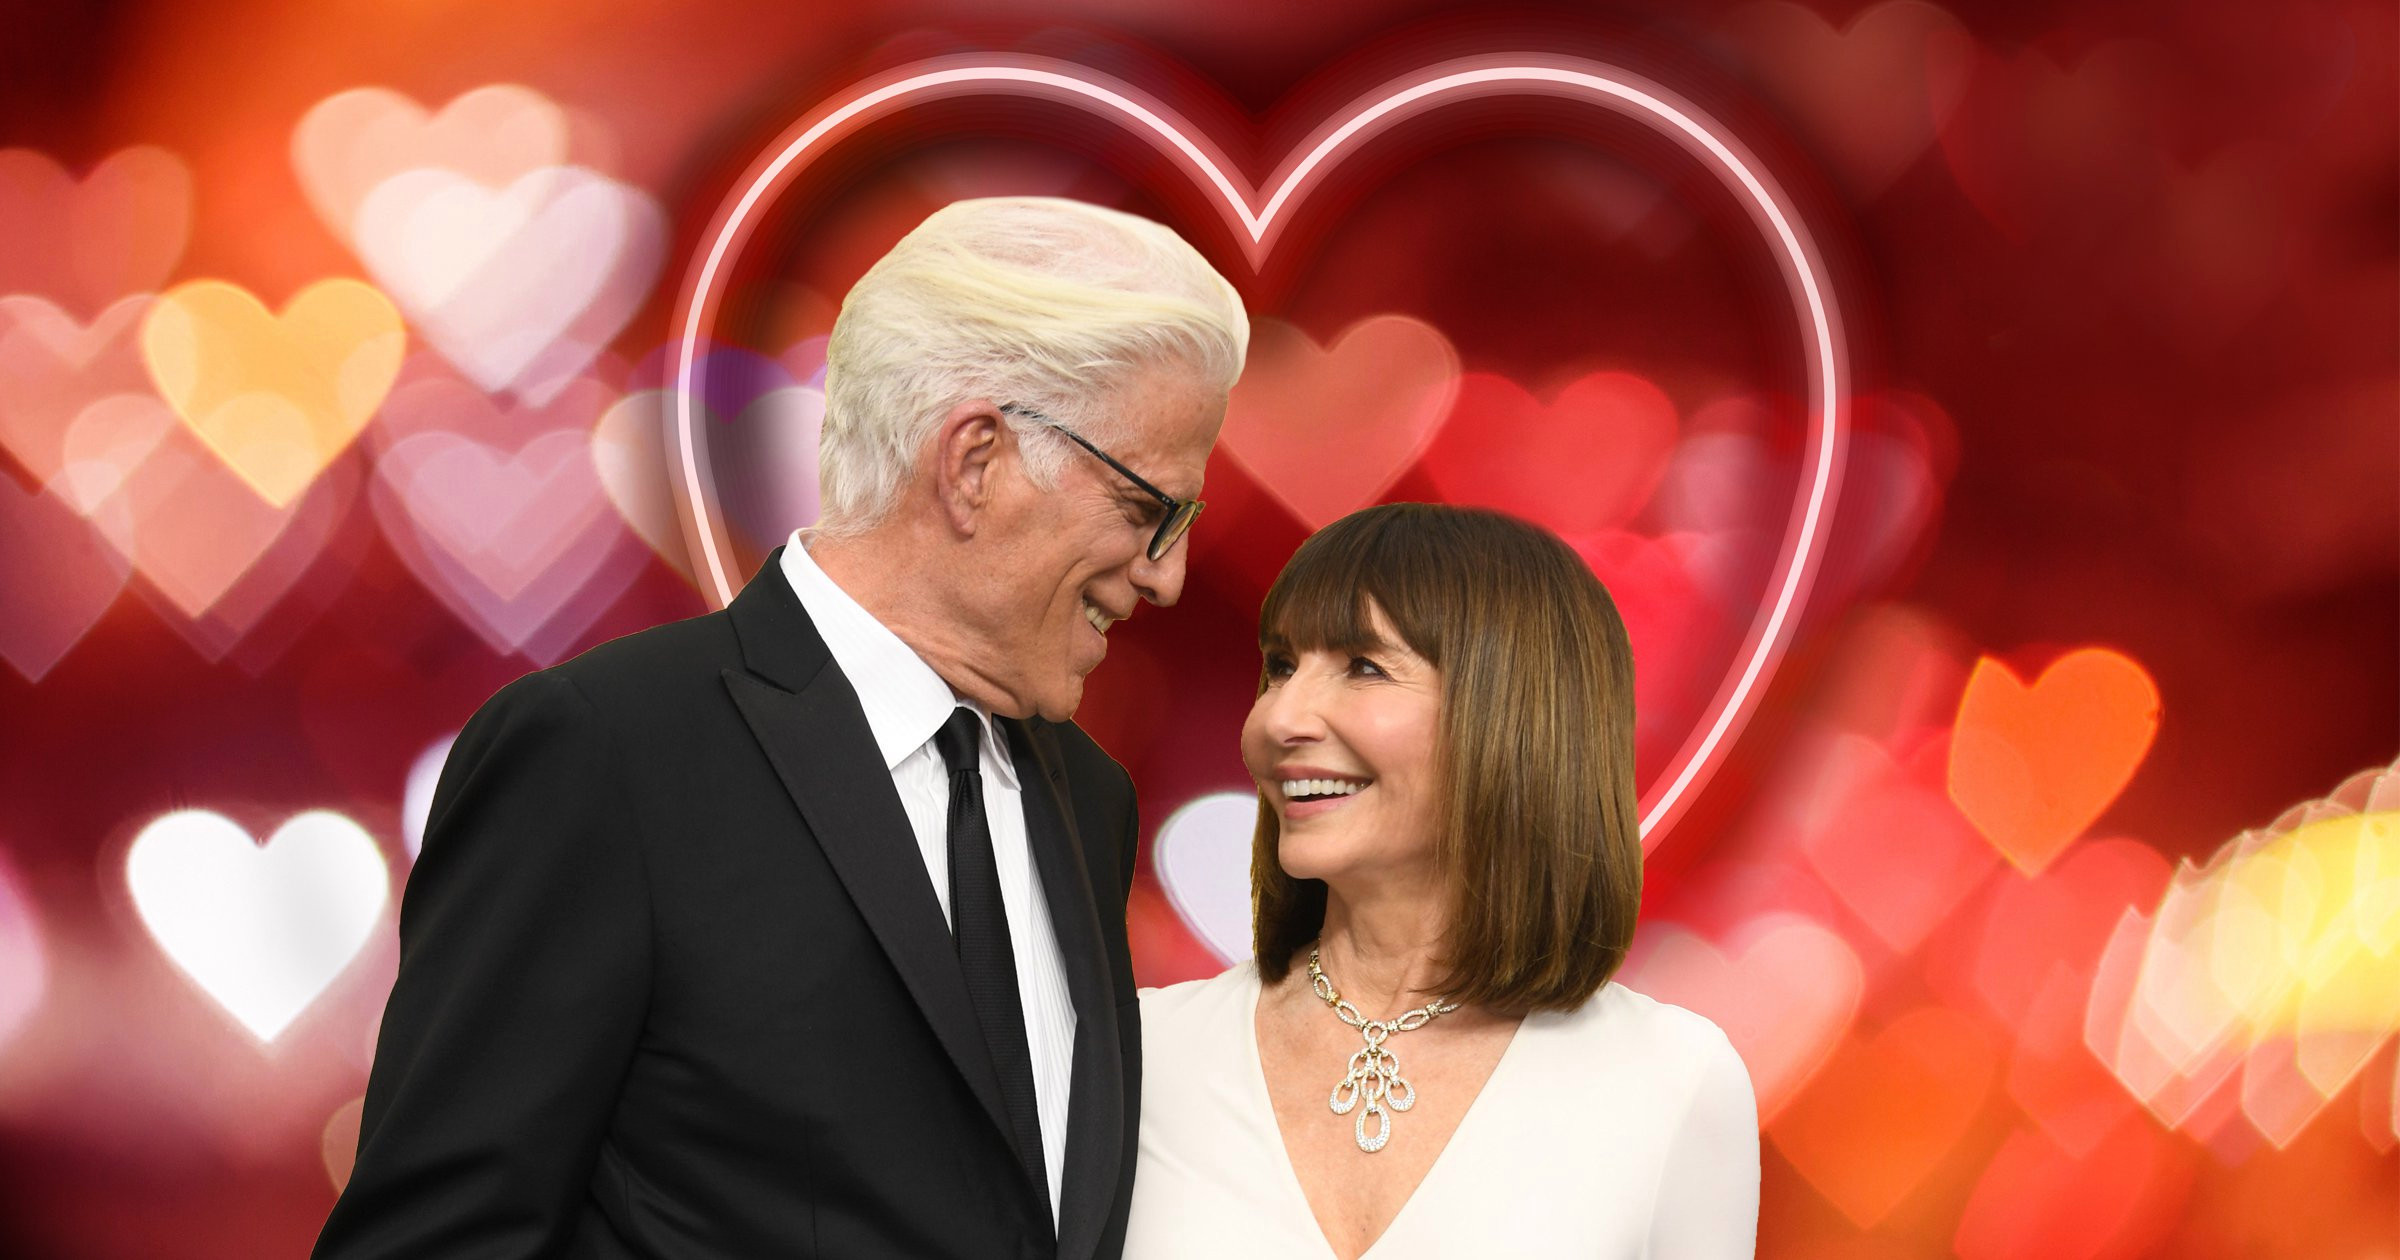 Ted Danson and Mary Steenburgen still head over heels in love after 25 years: ‘I would sign up for 100 more lifetimes’